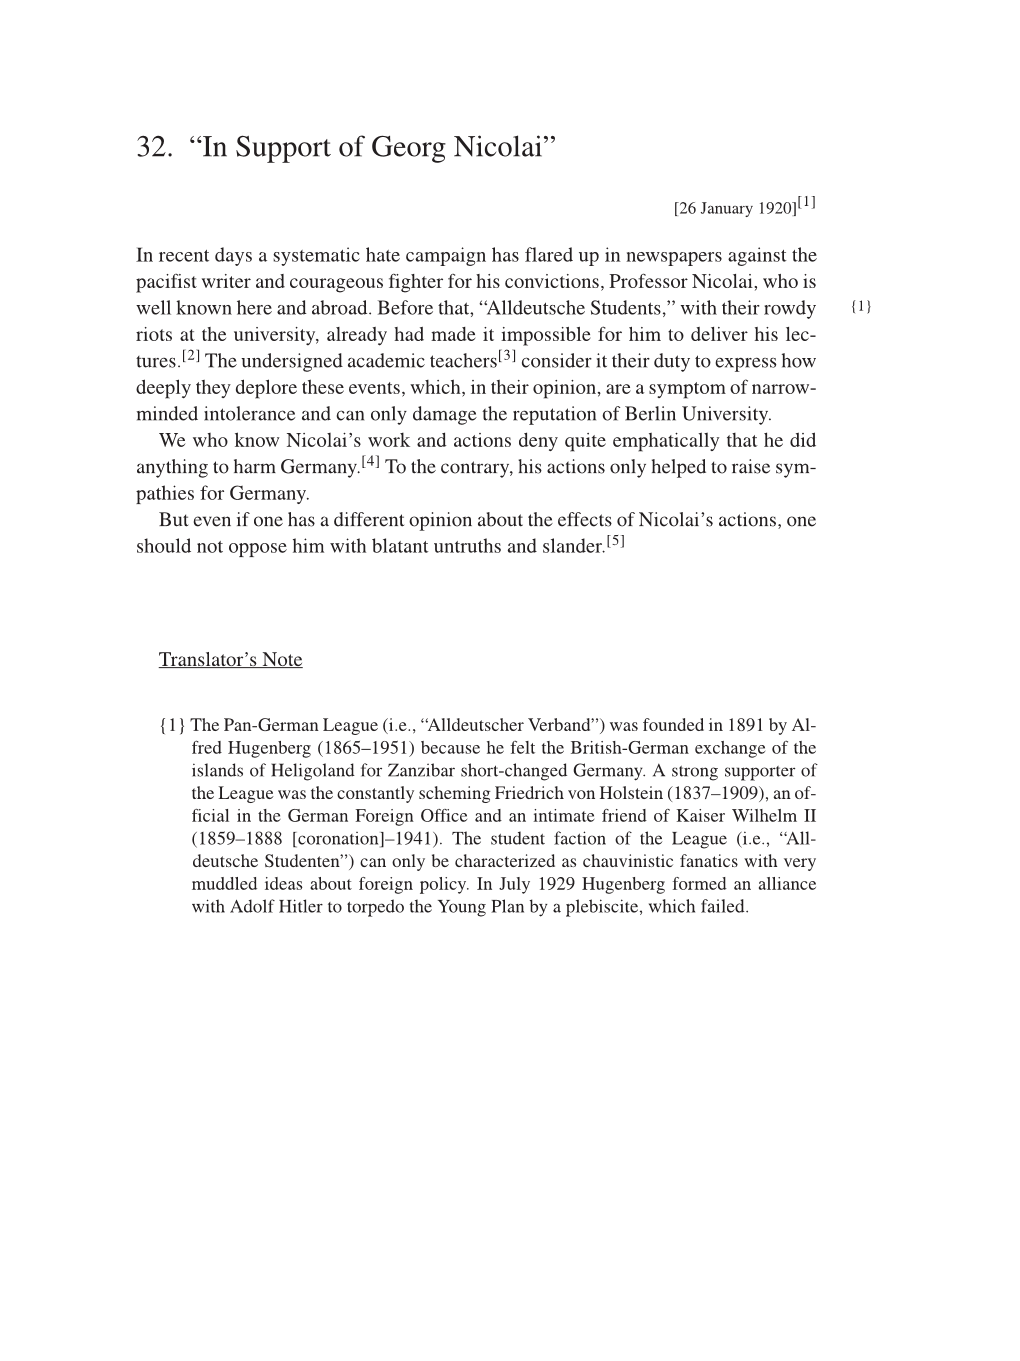 Volume 7: The Berlin Years: Writings, 1918-1921 (English translation supplement) page 151